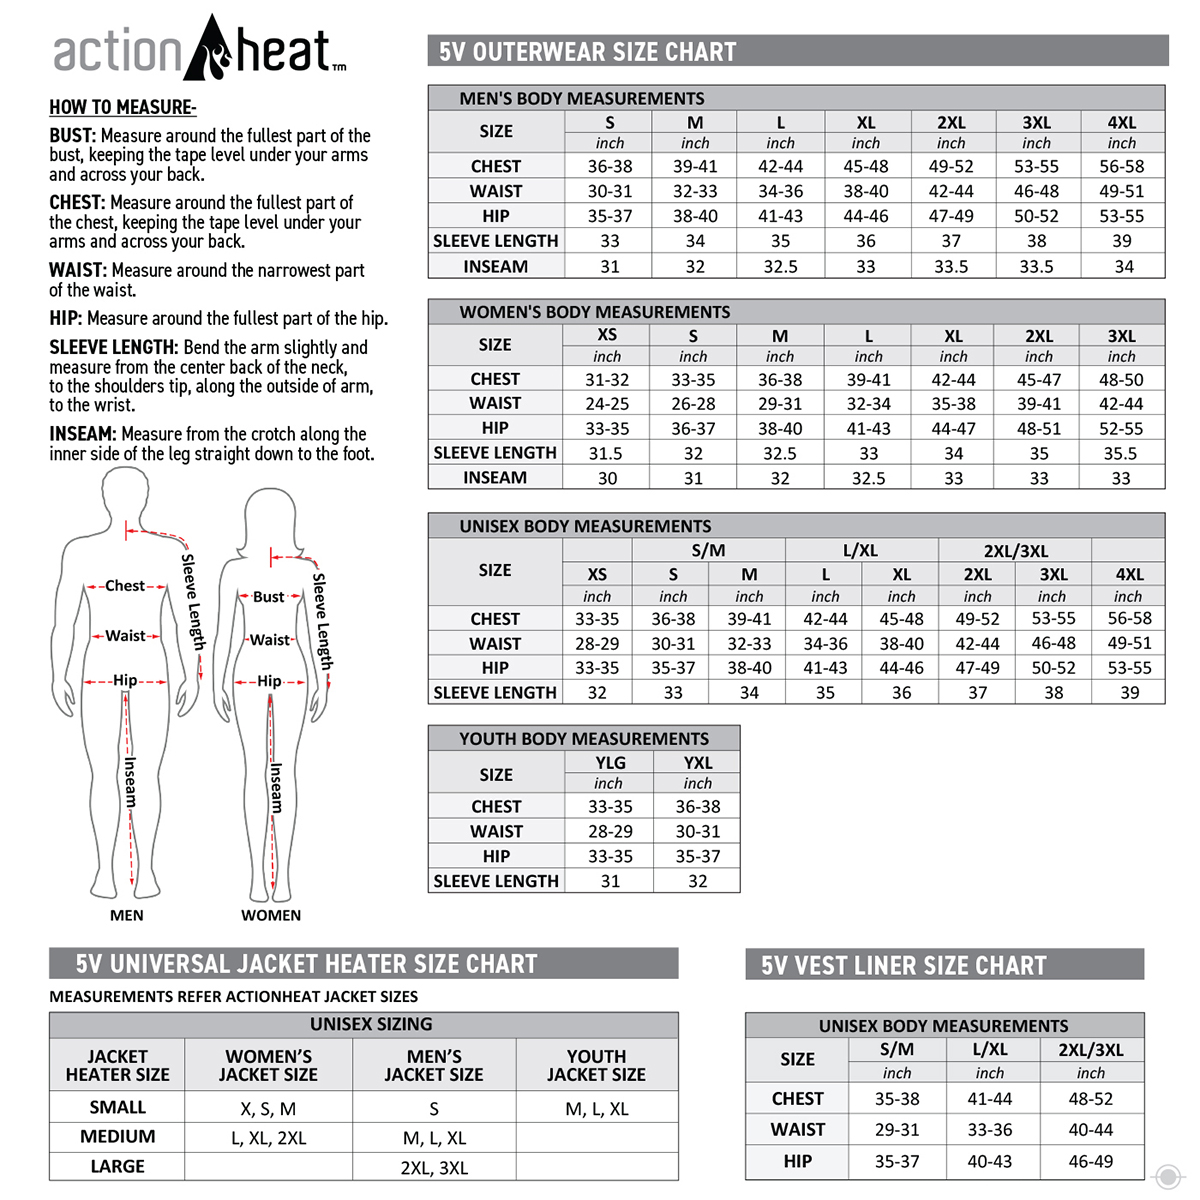 actionheat 5v outerwear size chart